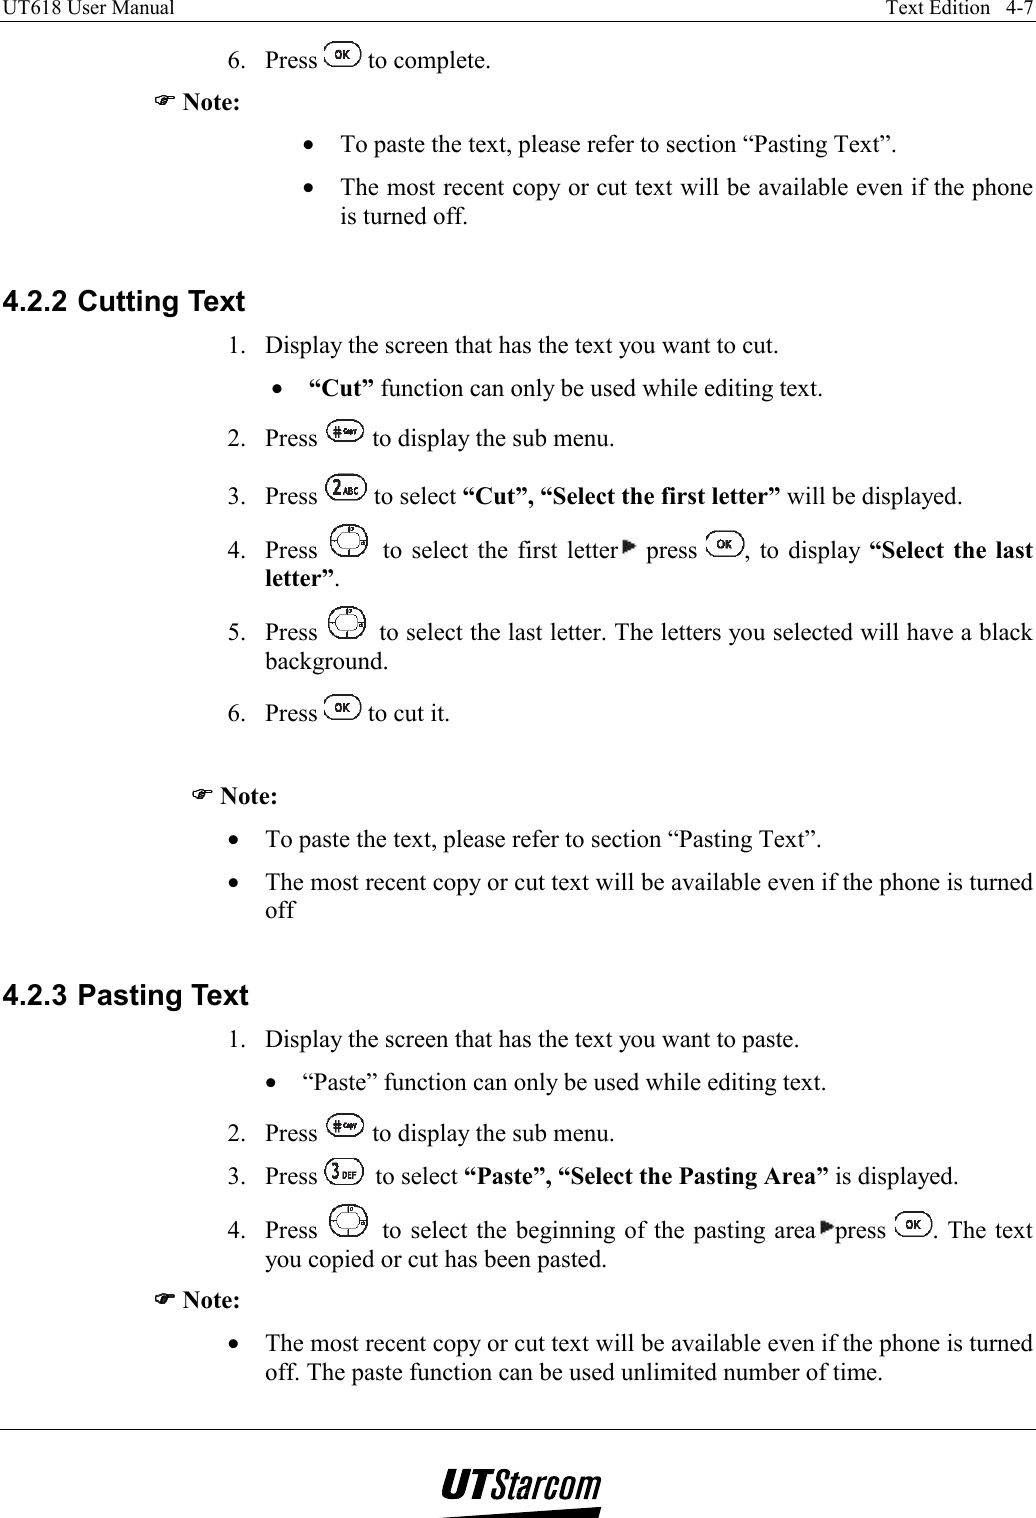 UT618 User Manual    Text Edition   4-7   6. Press   to complete. )))) Note: •  To paste the text, please refer to section “Pasting Text”. •  The most recent copy or cut text will be available even if the phone is turned off.  4.2.2 Cutting Text 1.  Display the screen that has the text you want to cut. •  “Cut” function can only be used while editing text. 2. Press   to display the sub menu. 3. Press   to select “Cut”, “Select the first letter” will be displayed. 4. Press   to select the first letter  press  , to display “Select the last letter”. 5. Press   to select the last letter. The letters you selected will have a black background. 6. Press   to cut it.  )))) Note: •  To paste the text, please refer to section “Pasting Text”. •  The most recent copy or cut text will be available even if the phone is turned off  4.2.3 Pasting Text 1.  Display the screen that has the text you want to paste. •  “Paste” function can only be used while editing text. 2. Press   to display the sub menu. 3. Press   to select “Paste”, “Select the Pasting Area” is displayed. 4. Press   to select the beginning of the pasting area press  . The text you copied or cut has been pasted. )))) Note: •  The most recent copy or cut text will be available even if the phone is turned off. The paste function can be used unlimited number of time. 